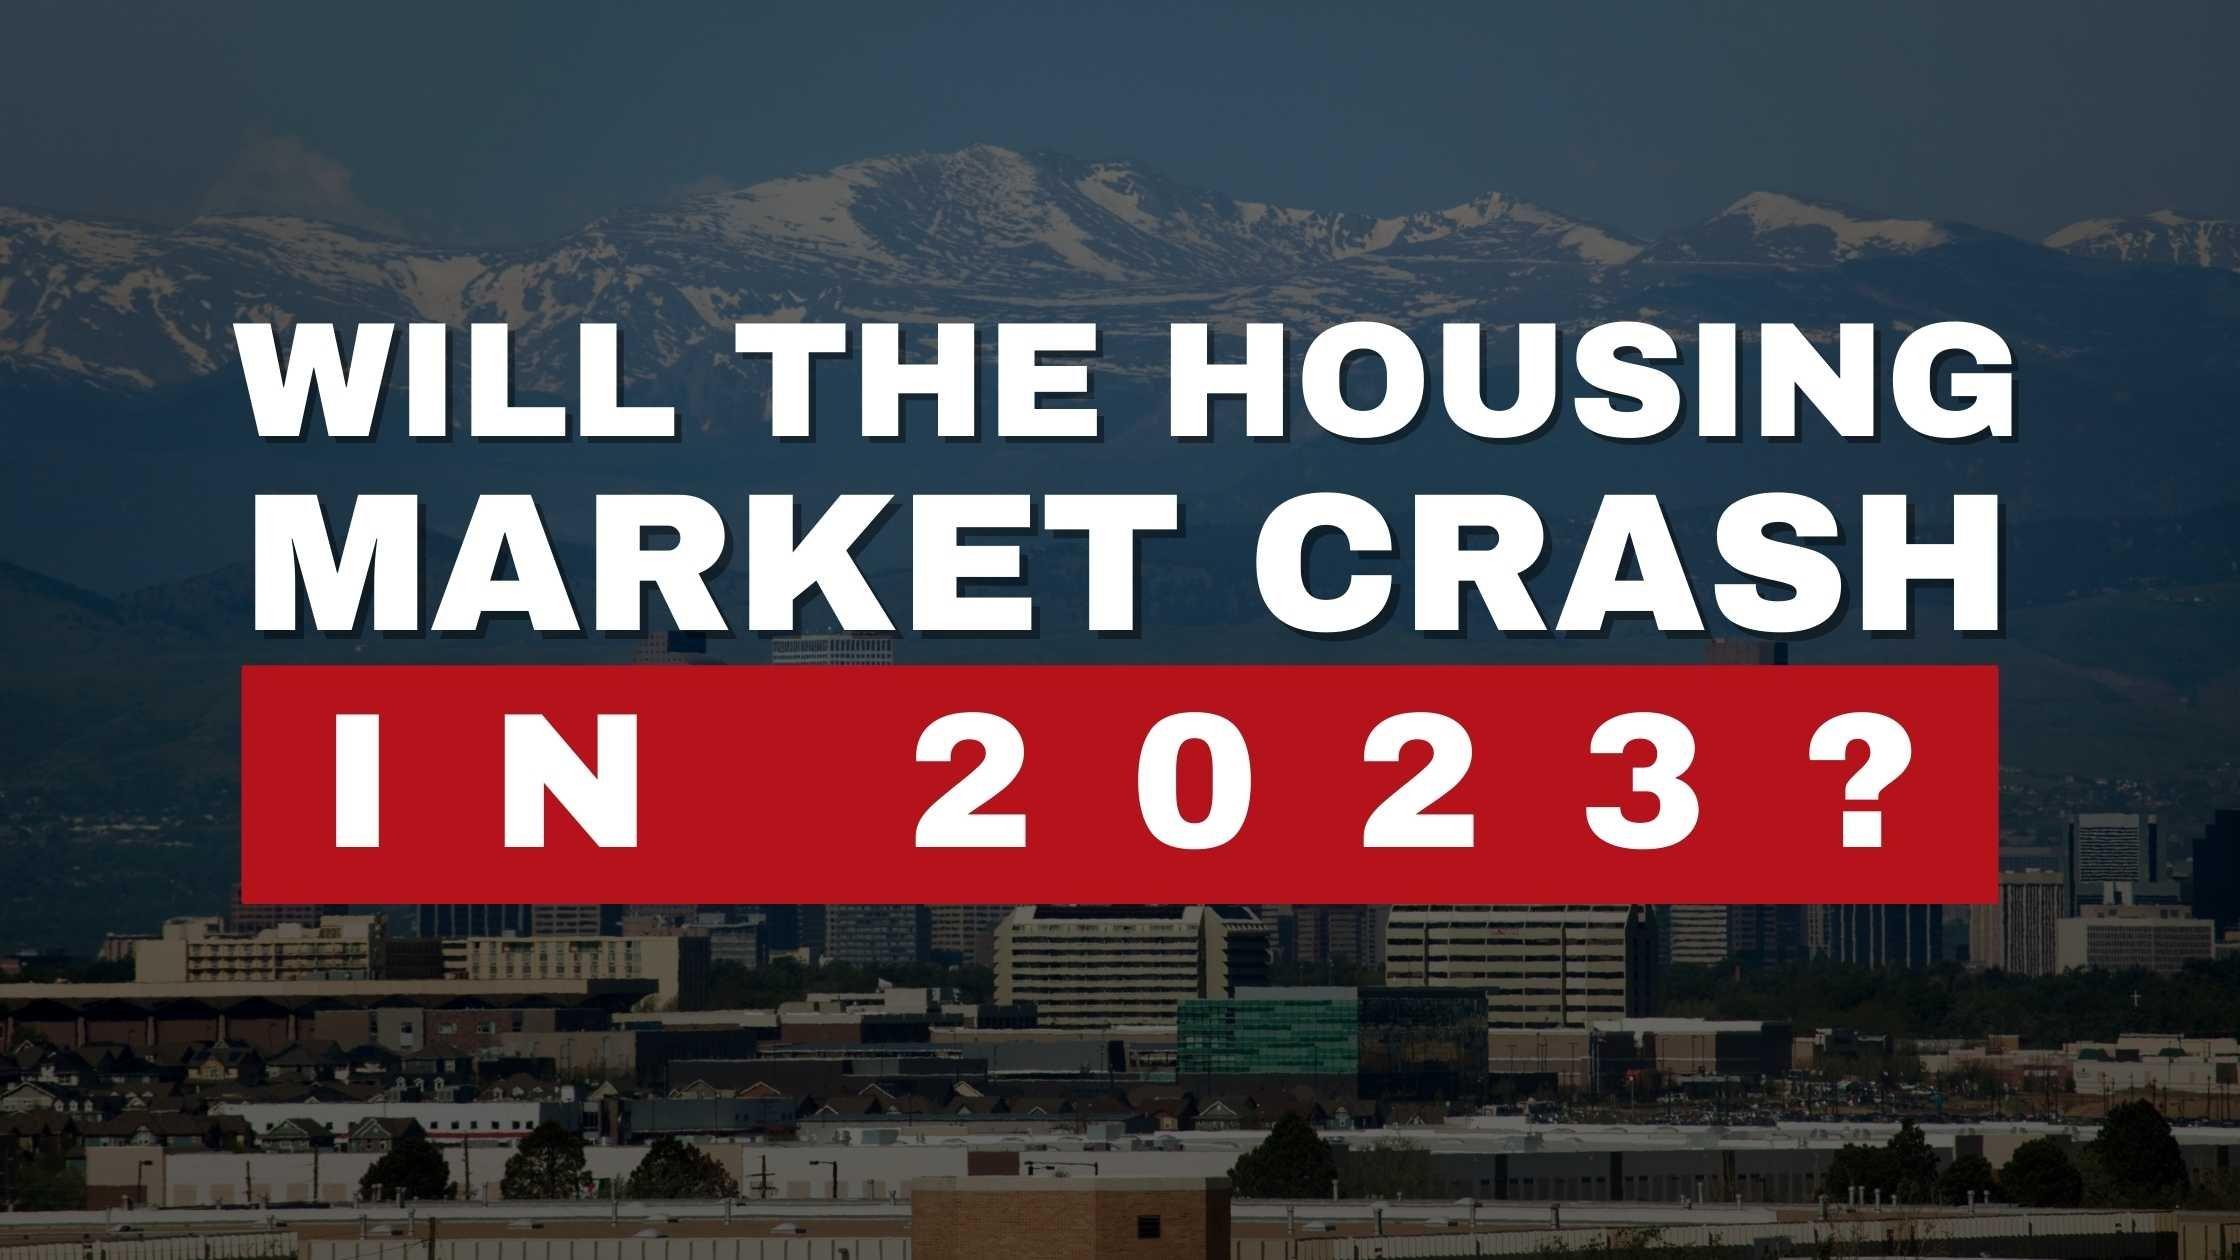 Is The Colorado Housing Market Going to Crash in 2023?